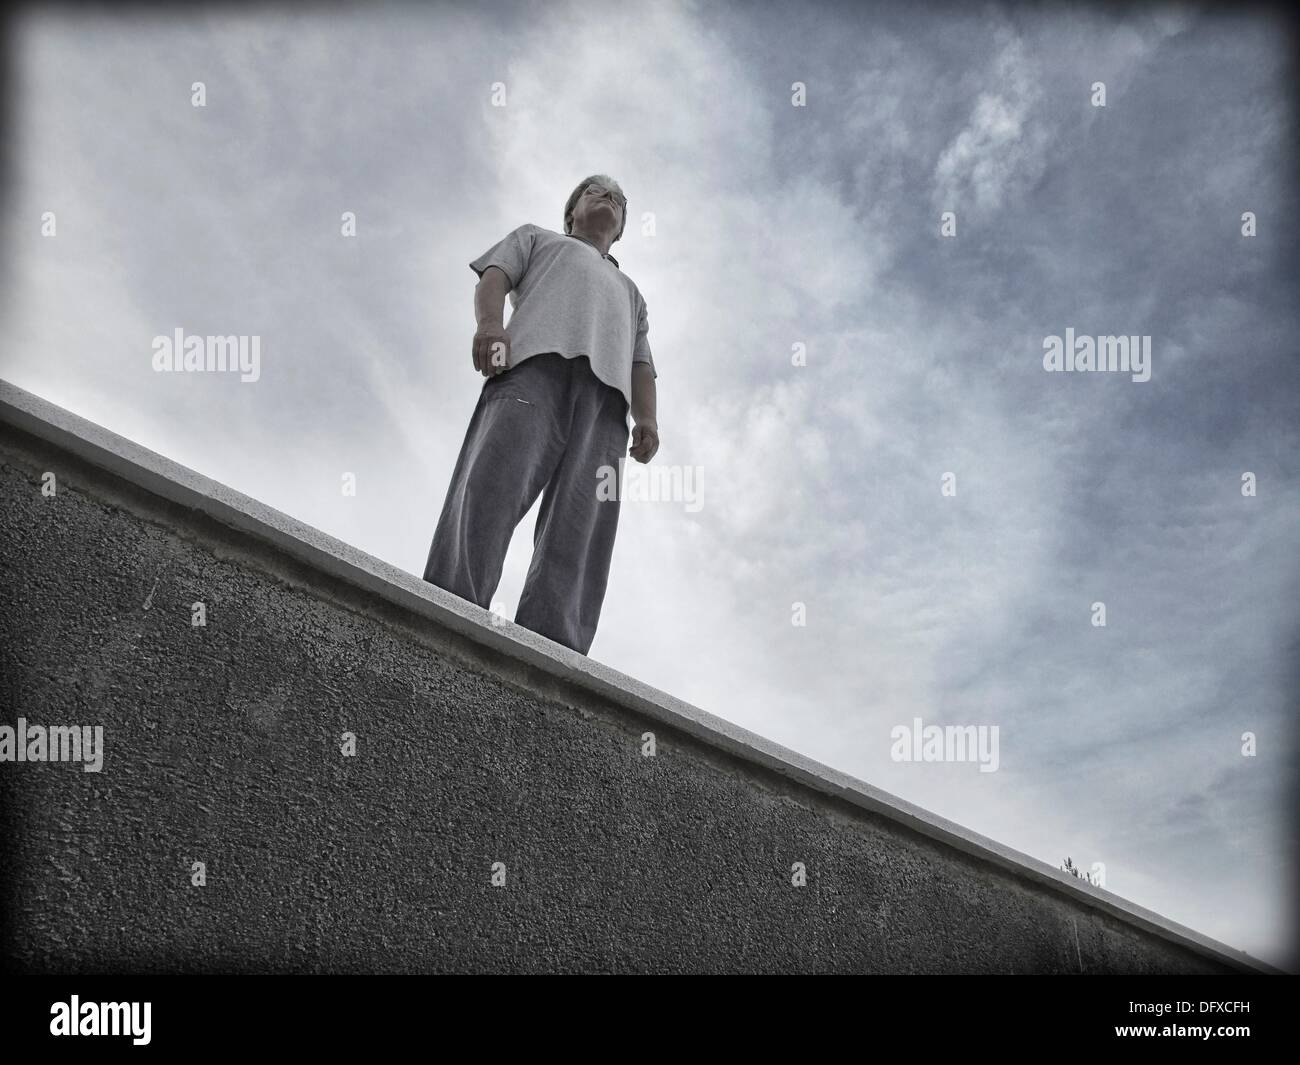 challenging-single-man-standing-on-a-ledge-DFXCFH.jpg